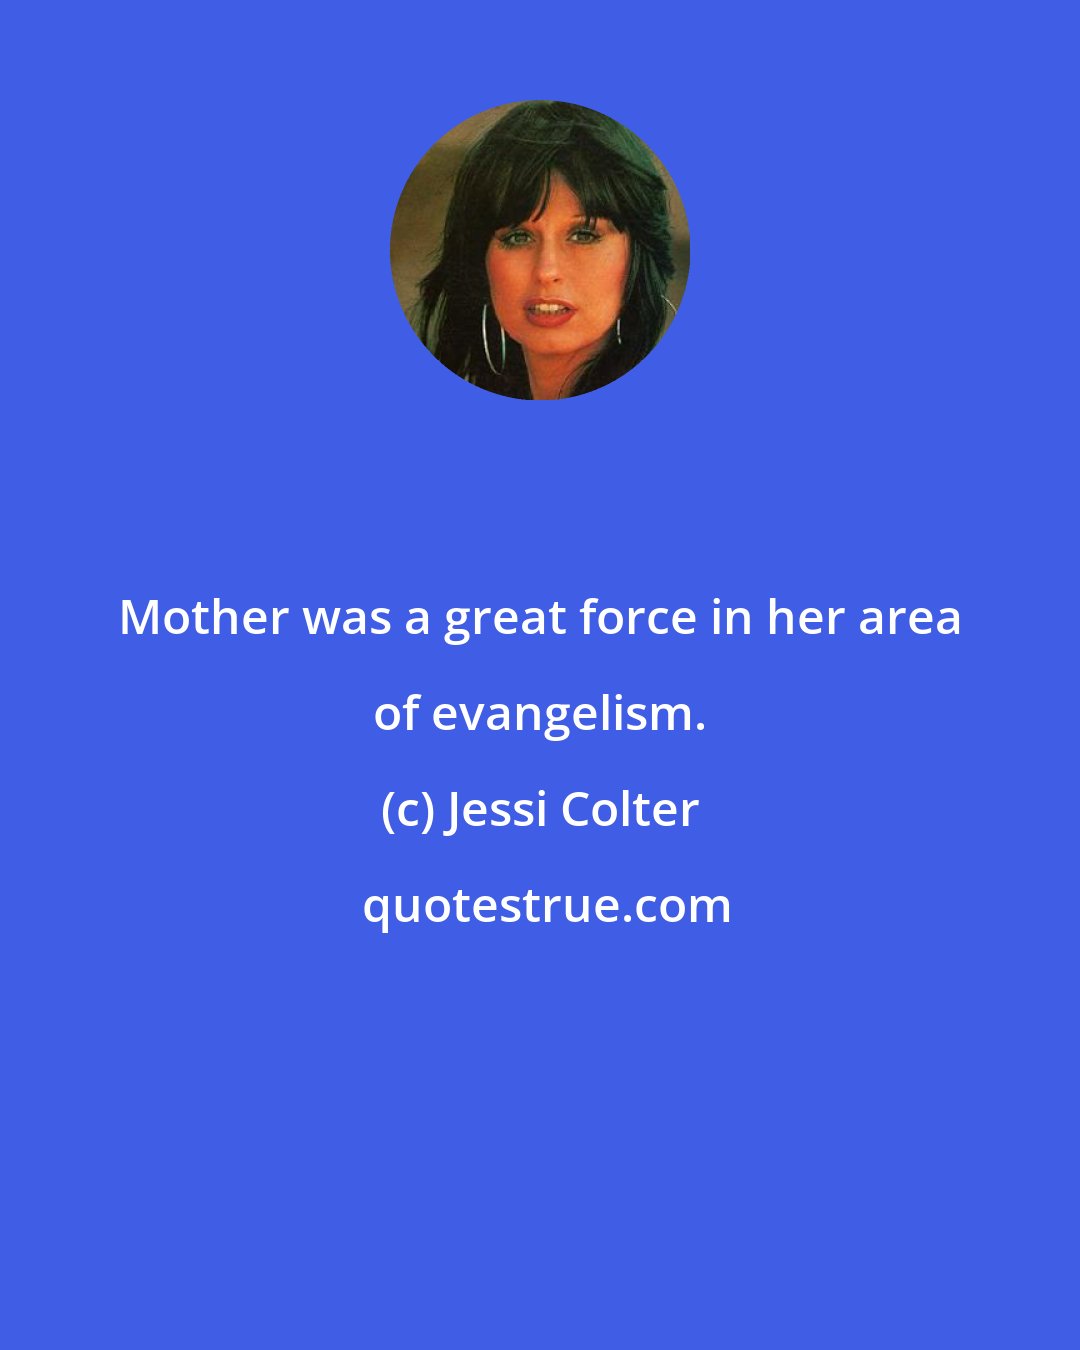 Jessi Colter: Mother was a great force in her area of evangelism.